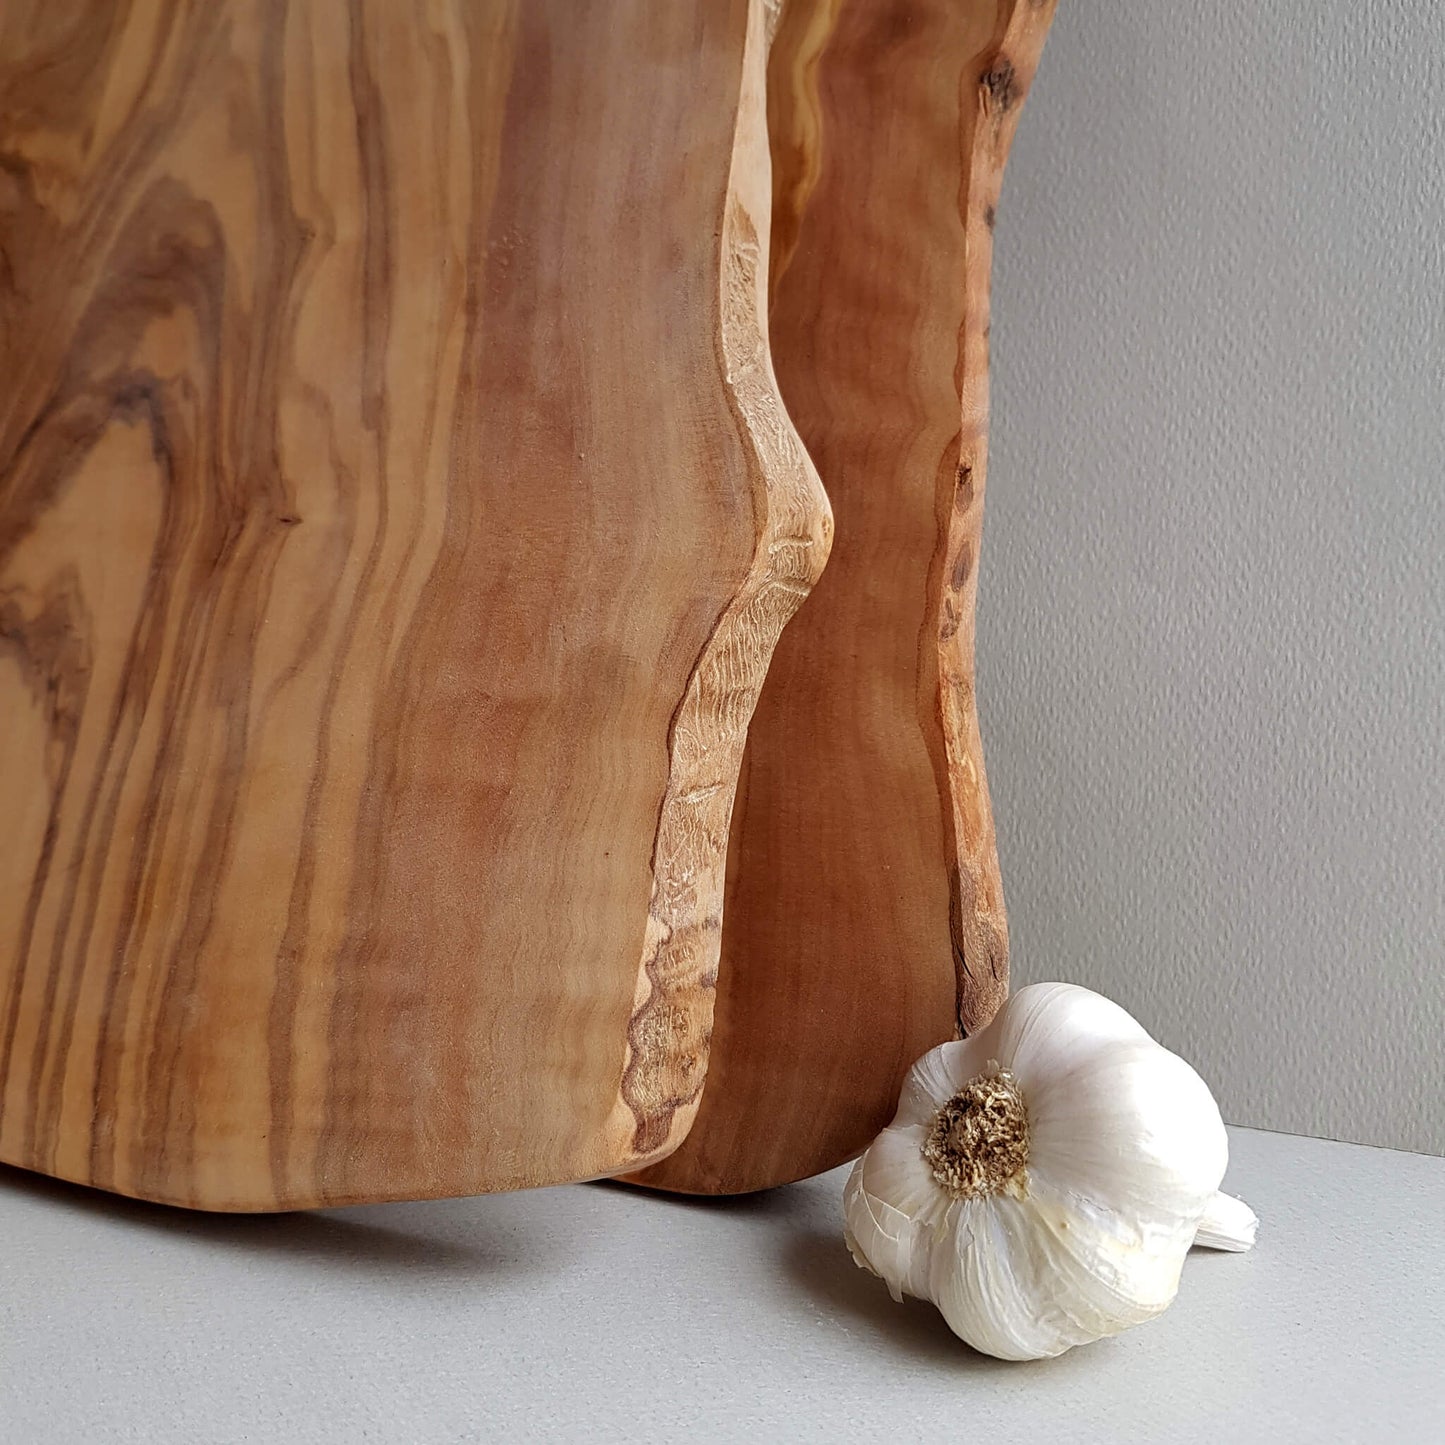 Sustainable Olive wood Handmade Cutting Board or Serving Platter Size M - Unik by Nature